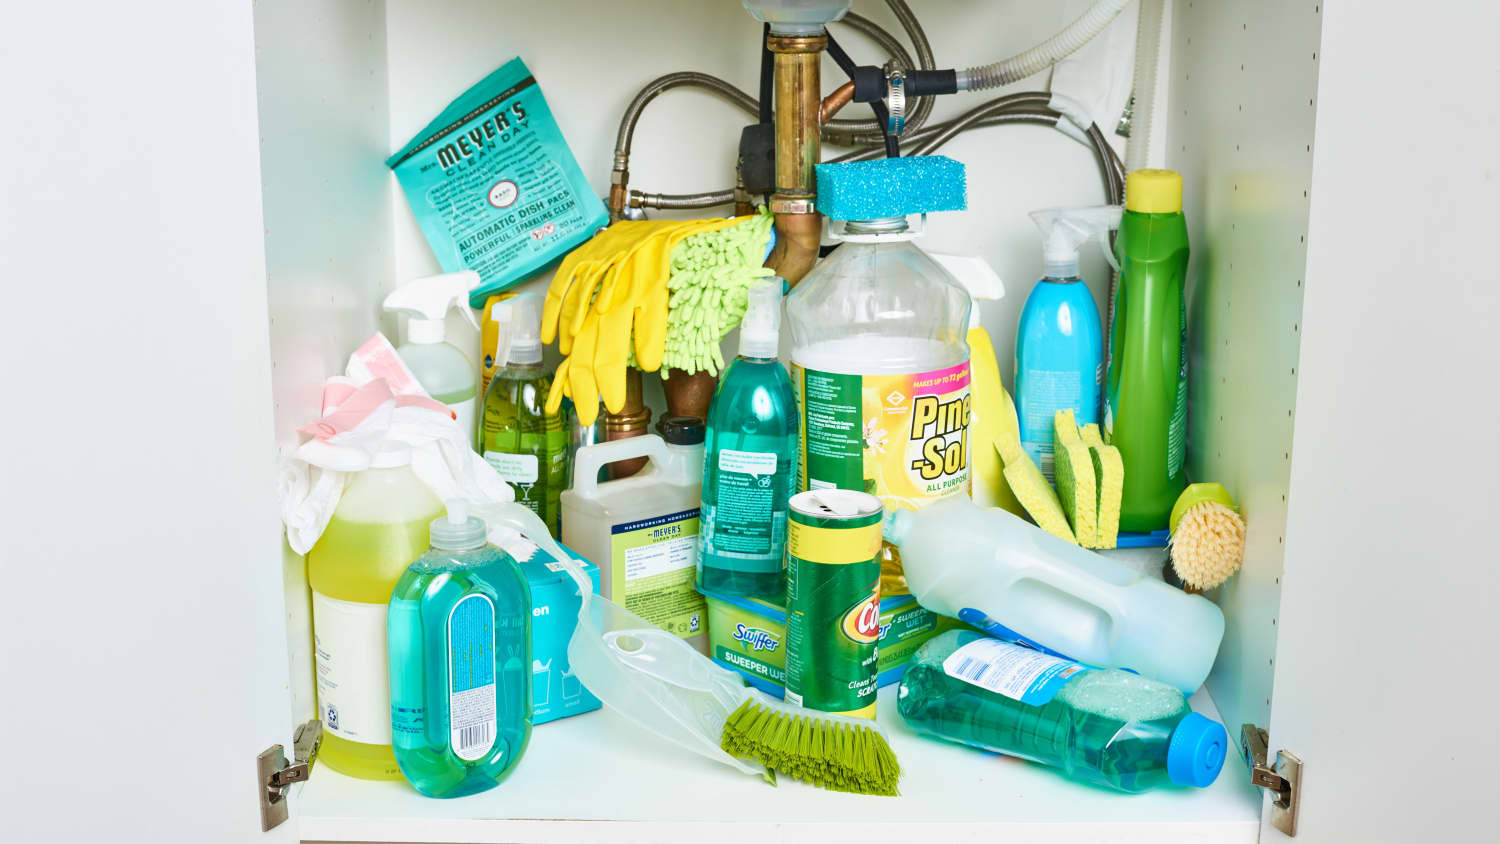 How to Organize Bathroom Cleaning Supplies